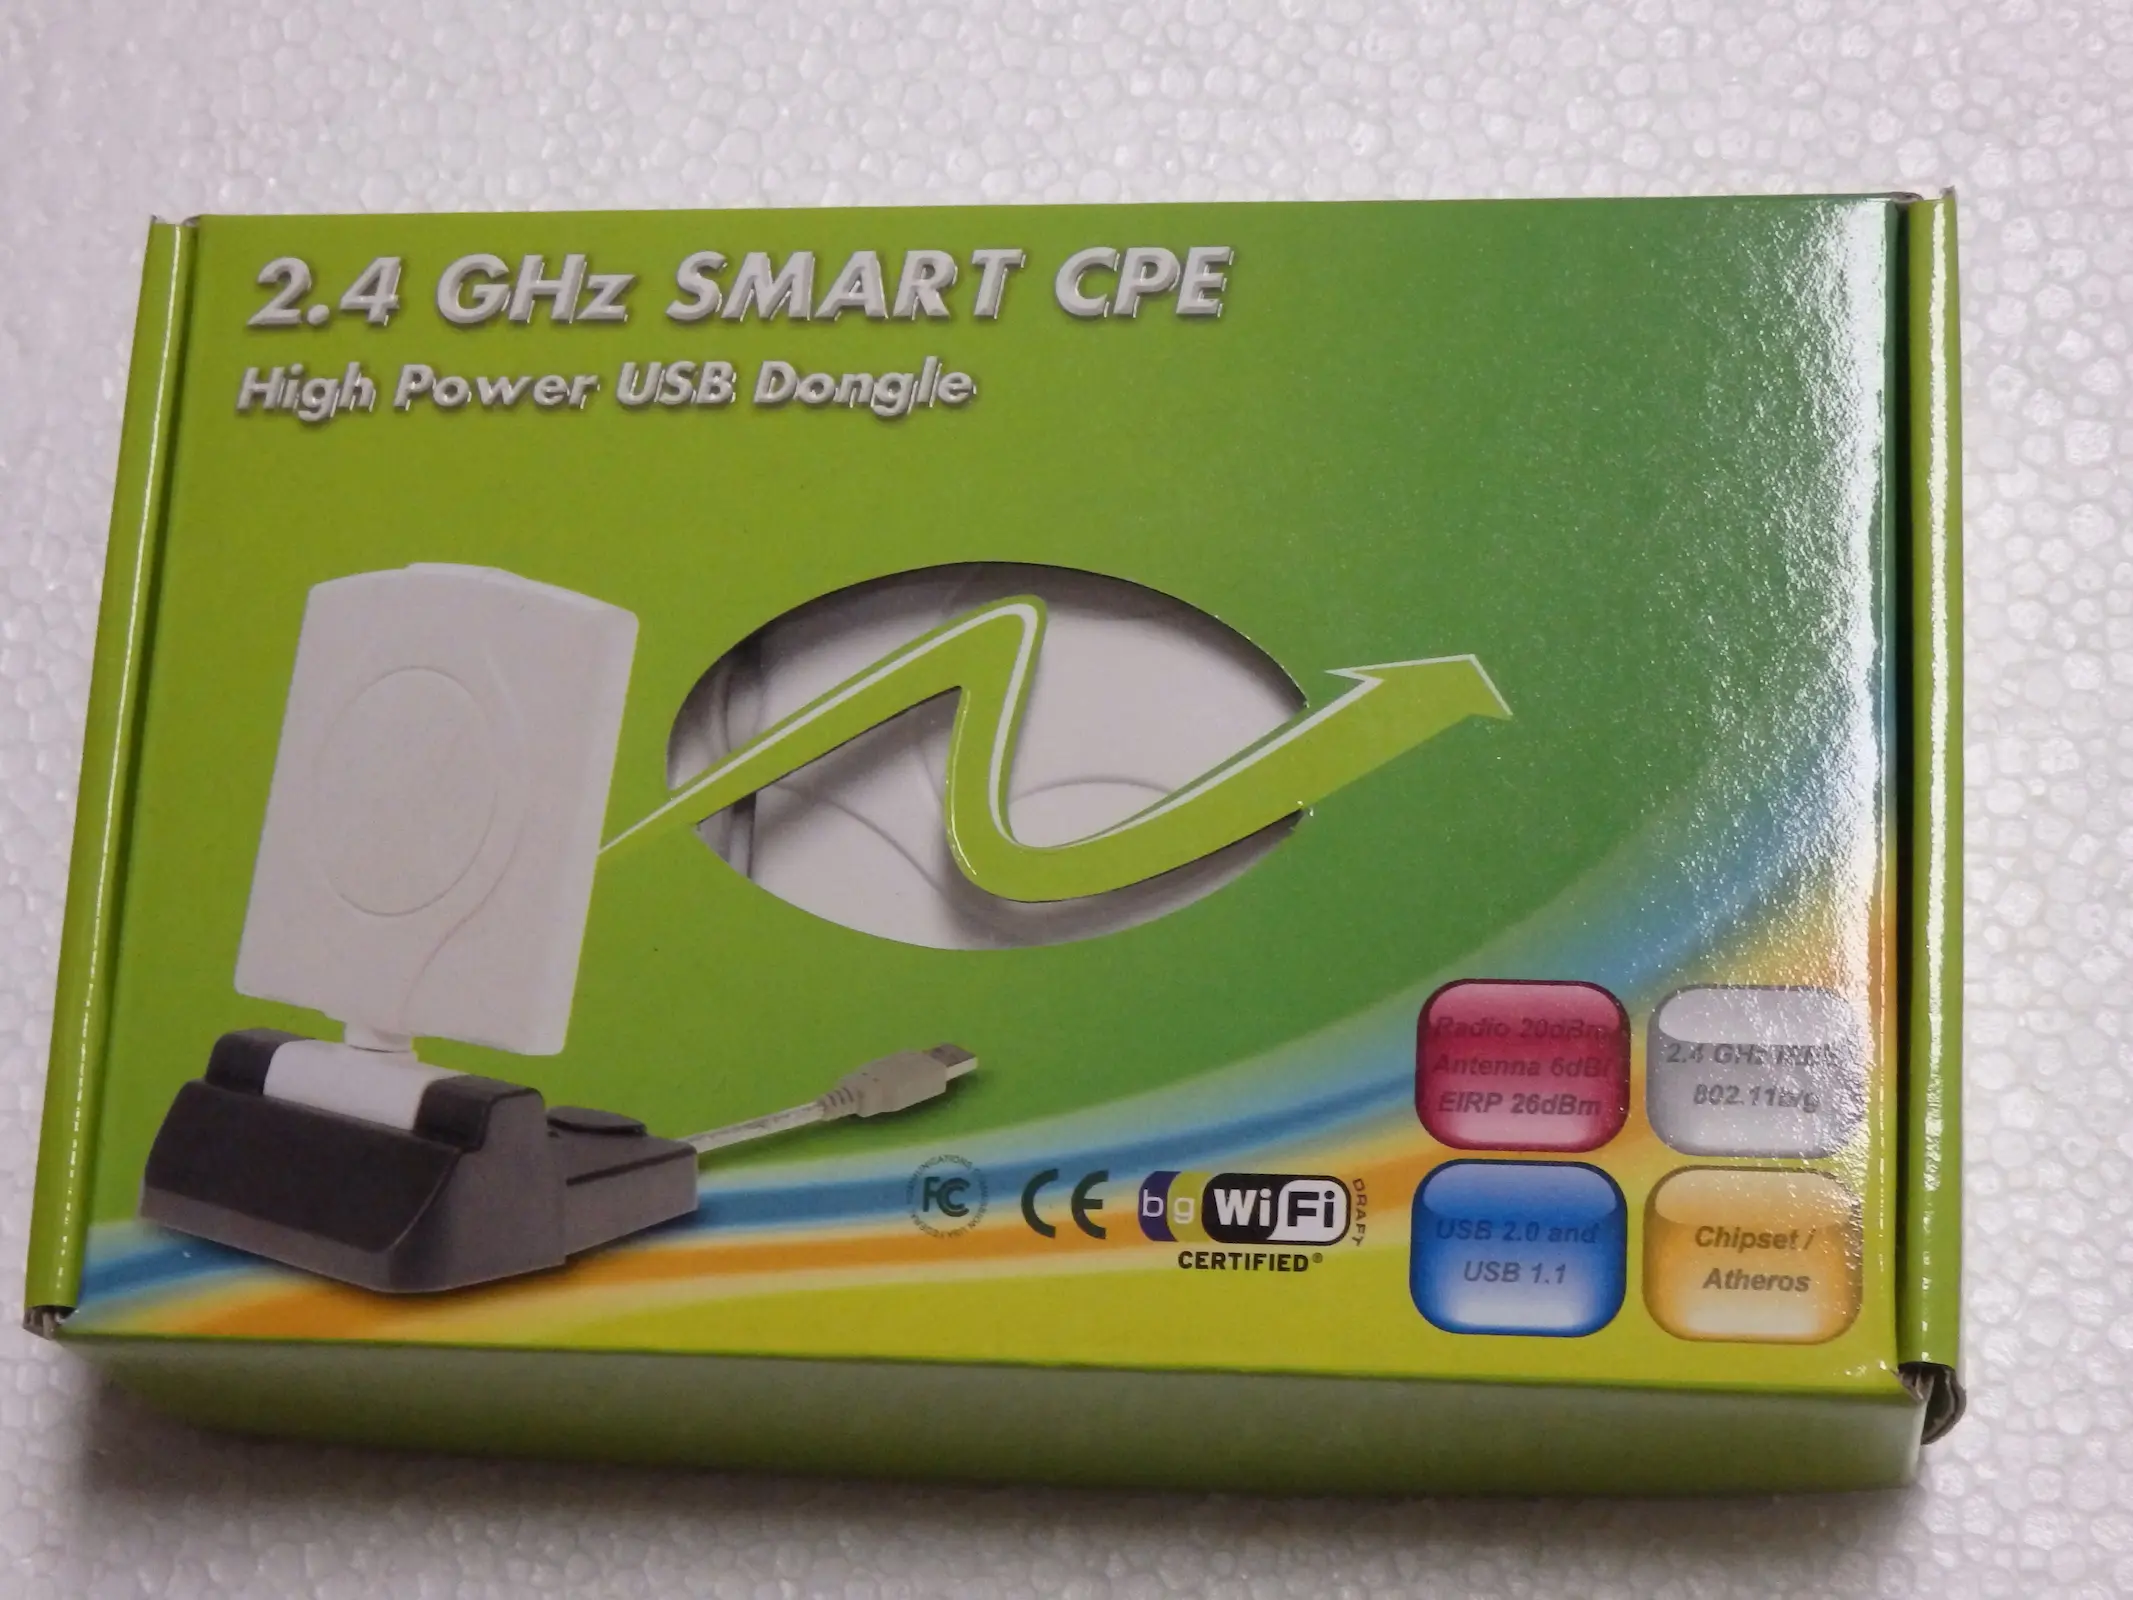 2.4GHz Smart CPE High Power USB Dongle